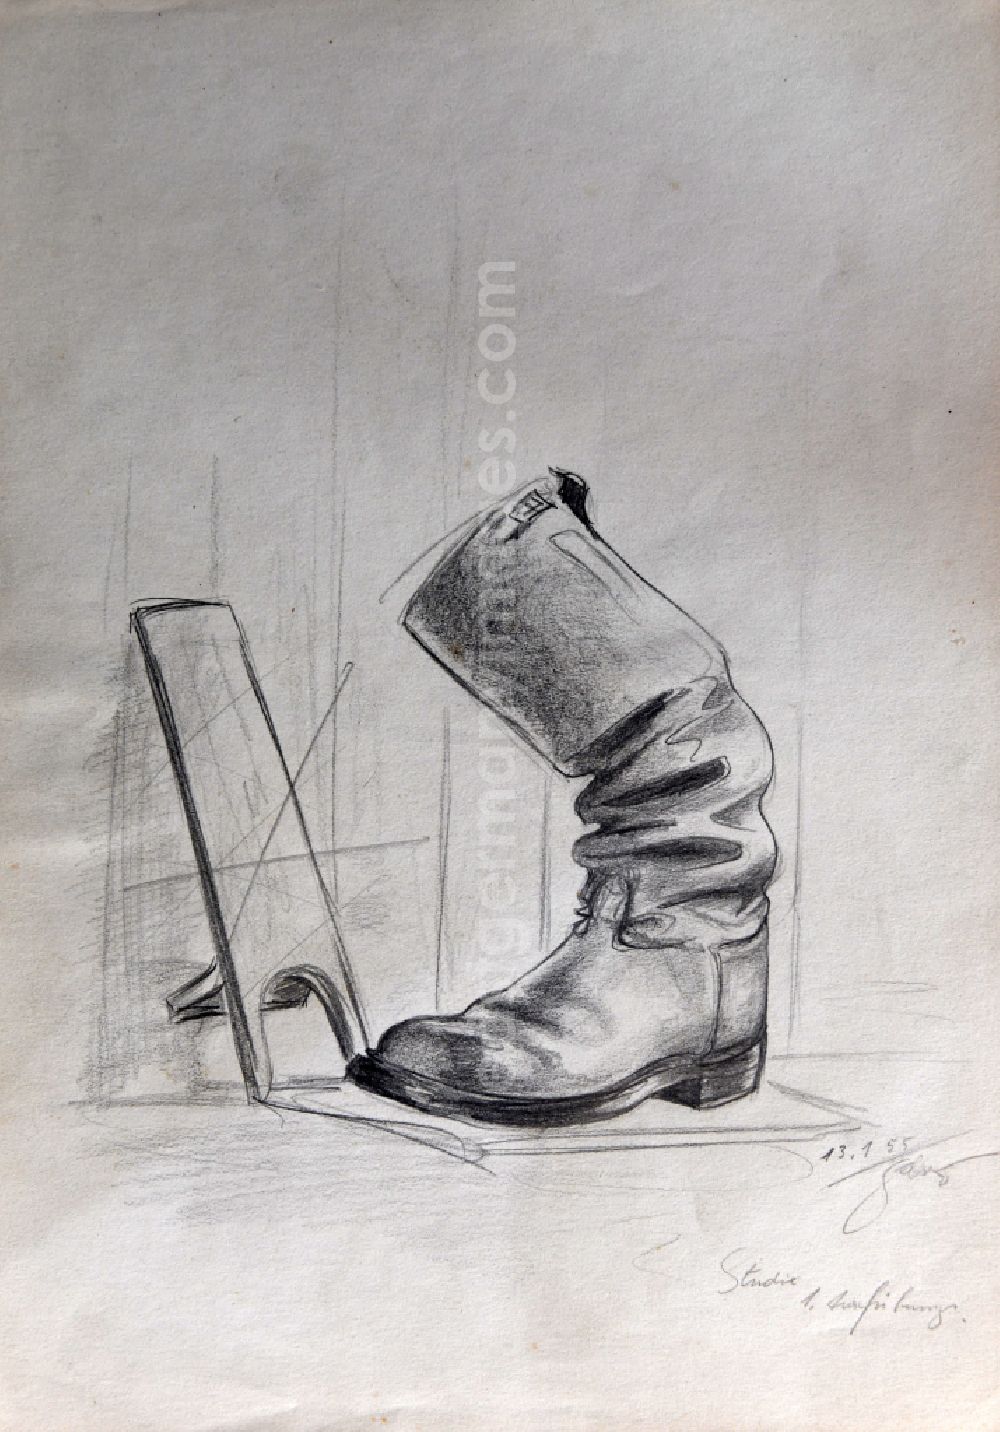 GDR picture archive: Halberstadt - VG picture free work: pencil drawing Boots & Shoe Servants by the artist Siegfried Gebser in Halberstadt in the state Saxony-Anhalt on the territory of the former GDR, German Democratic Republic